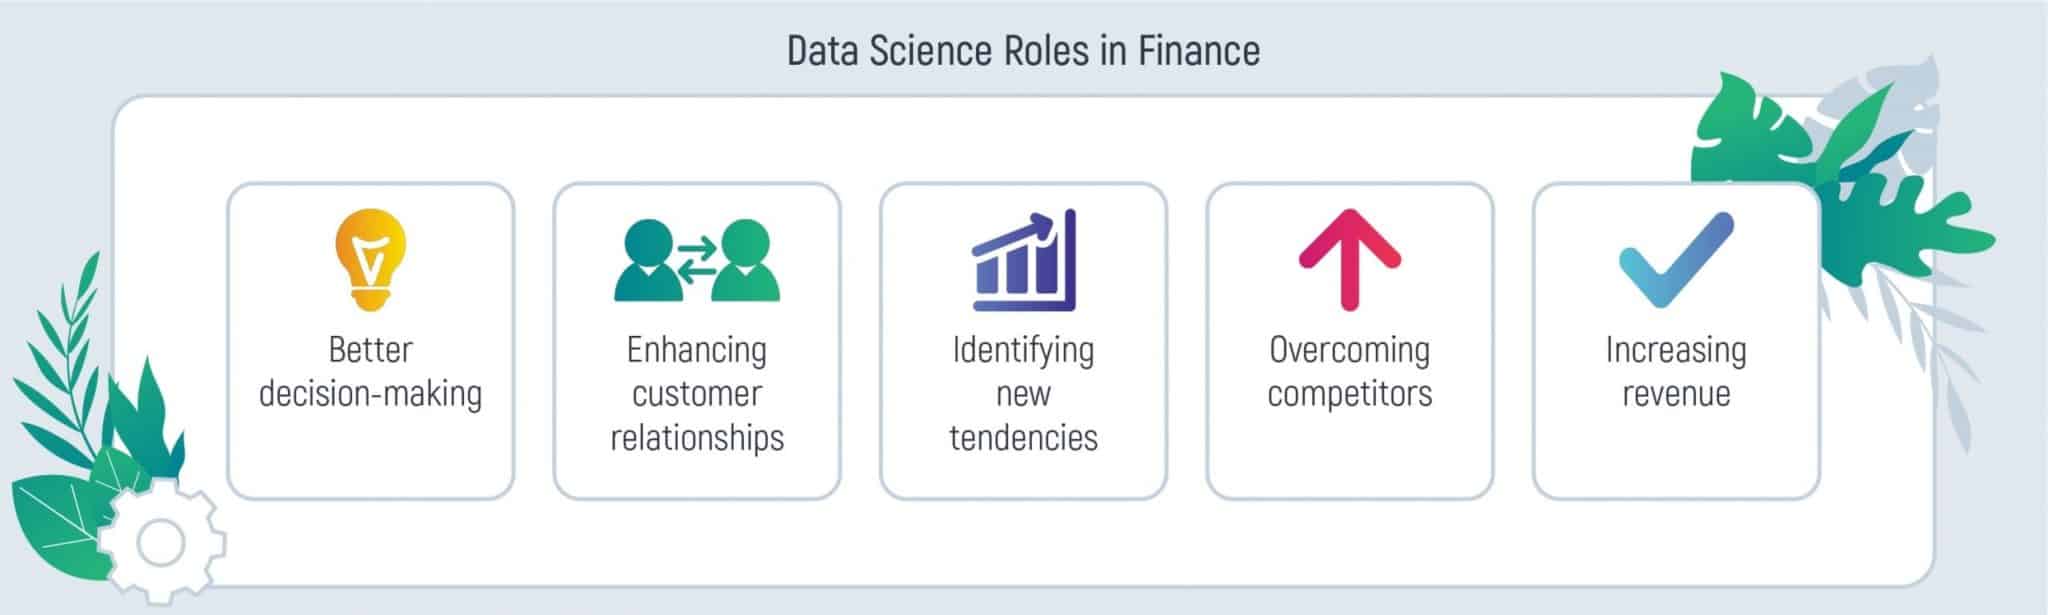 Data Science Roles in Finance